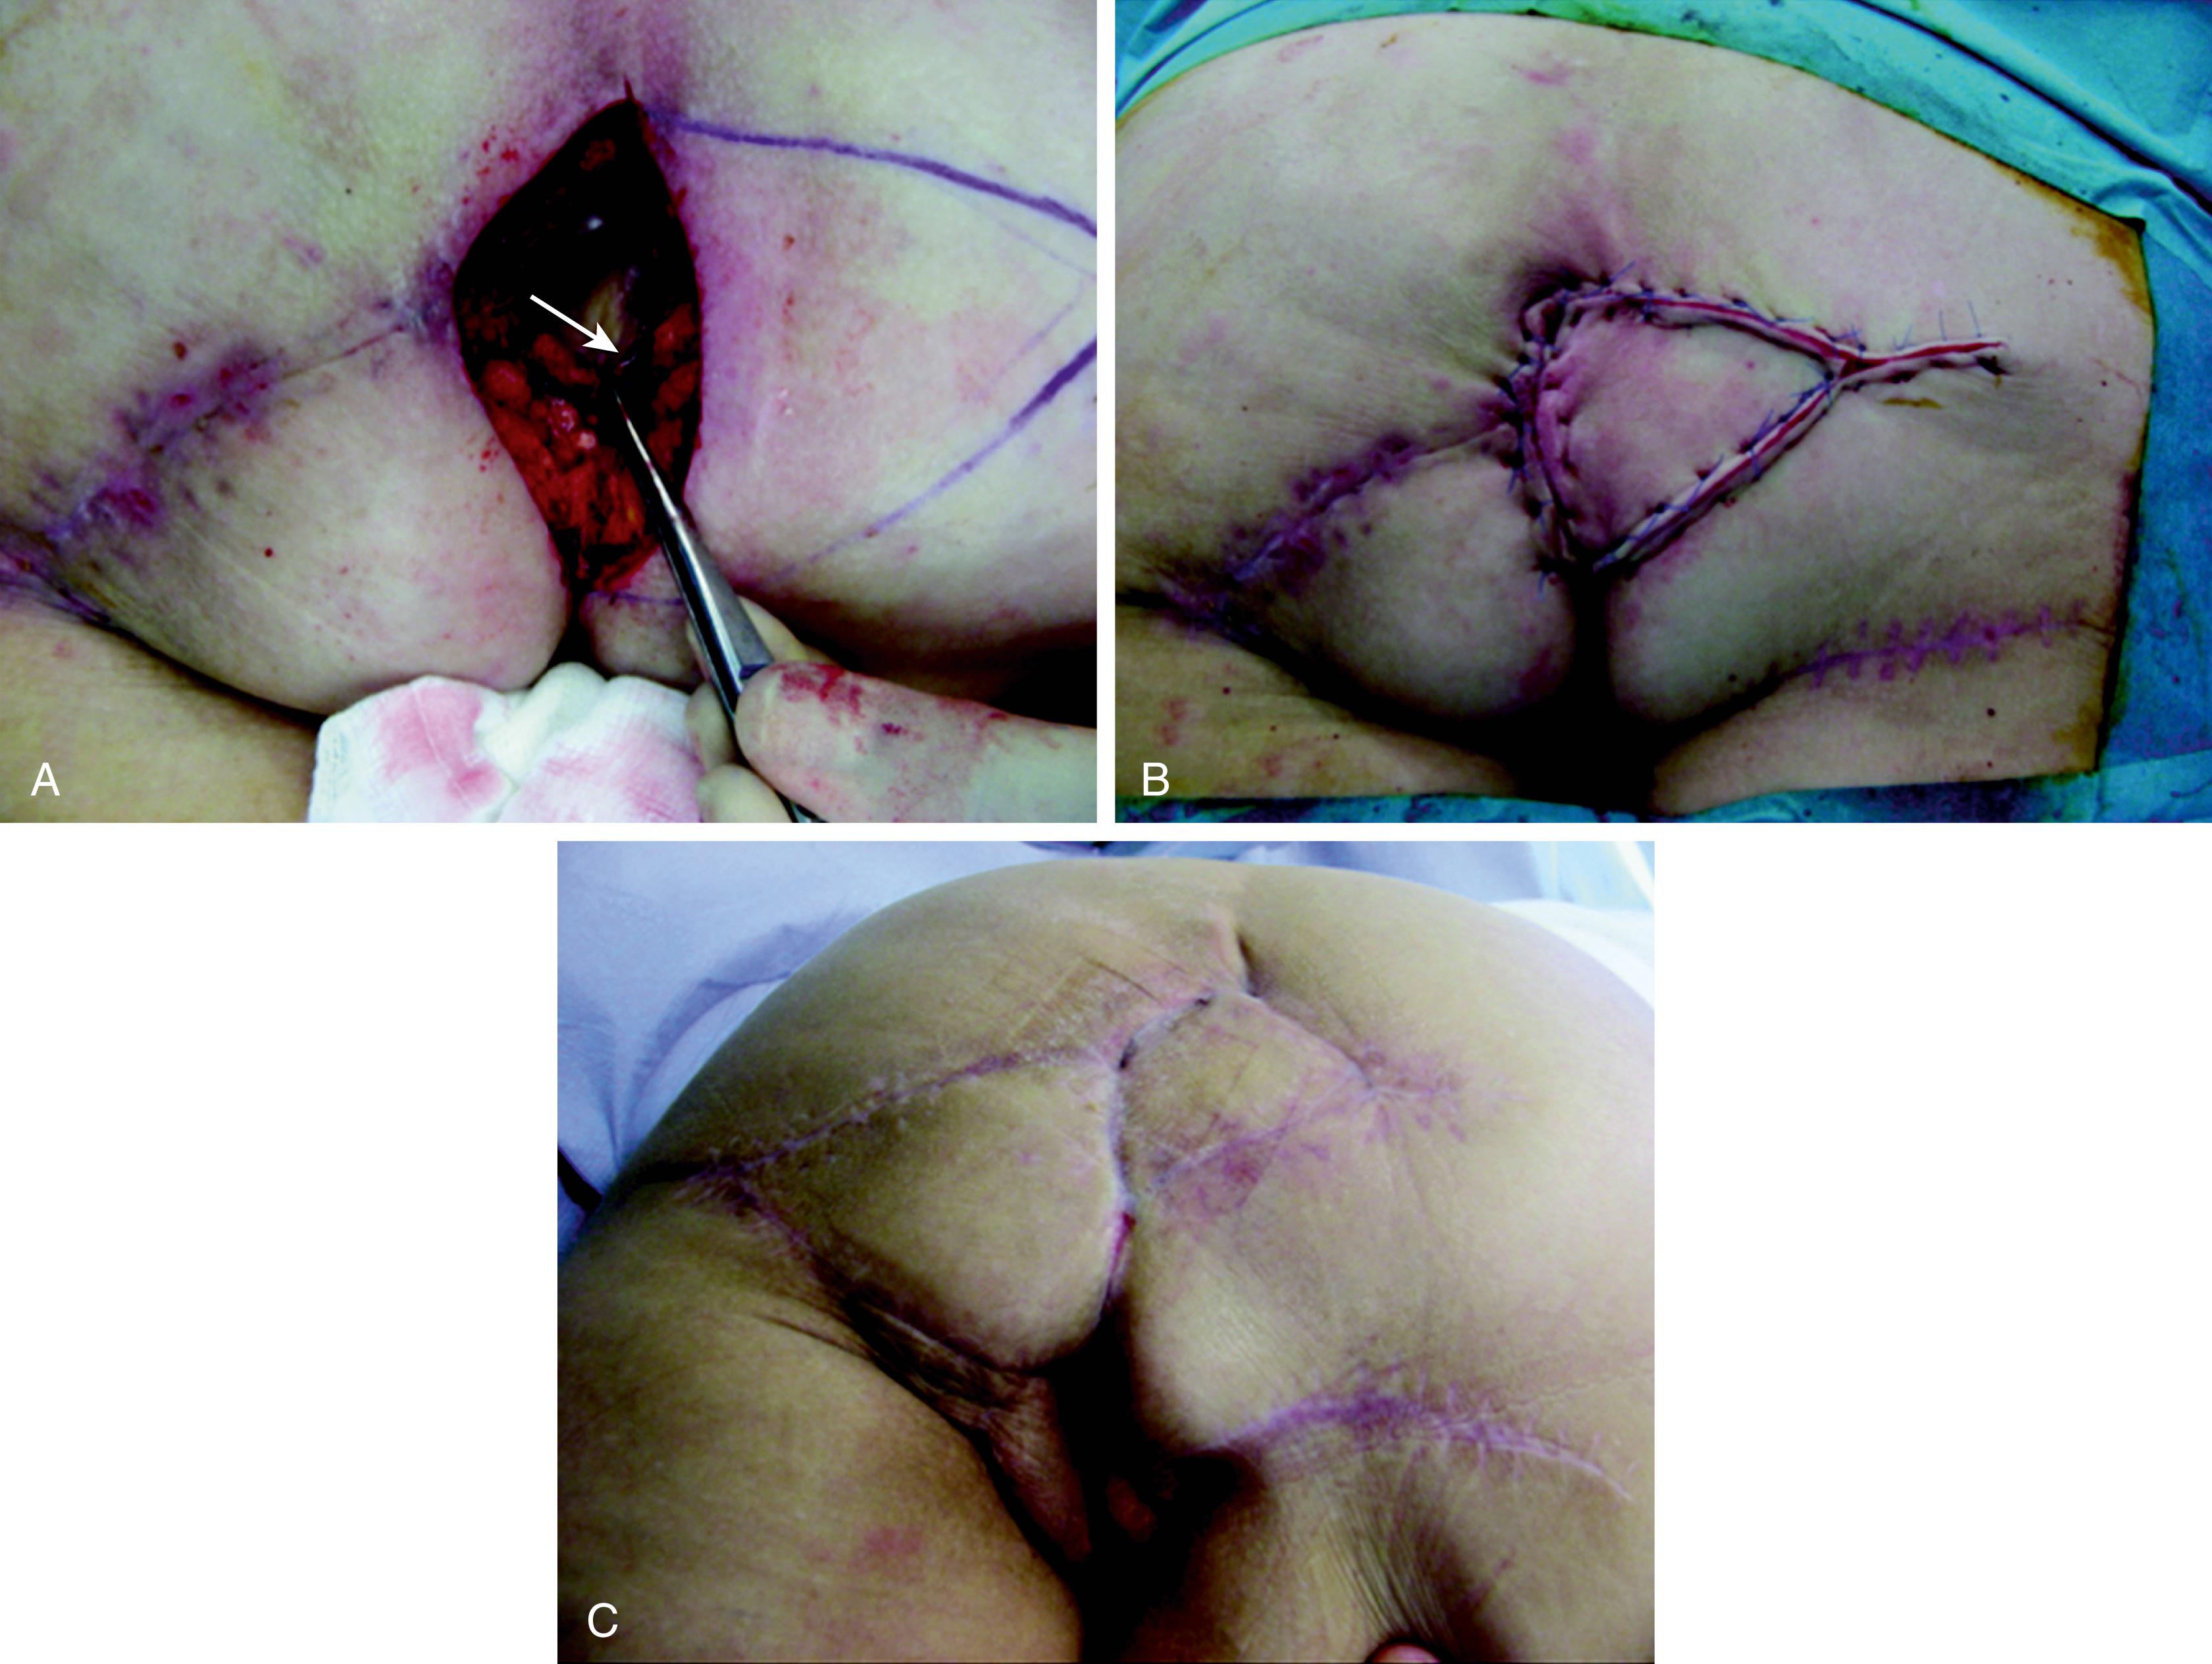 Fig. 41.10, Inferior gluteal artery flap, island flap V–Y advancement. (A) Postperineal reconstruction wound showing intact gluteal fold flap. (B) Immediate postoperative result. (C) Three months postoperative result.